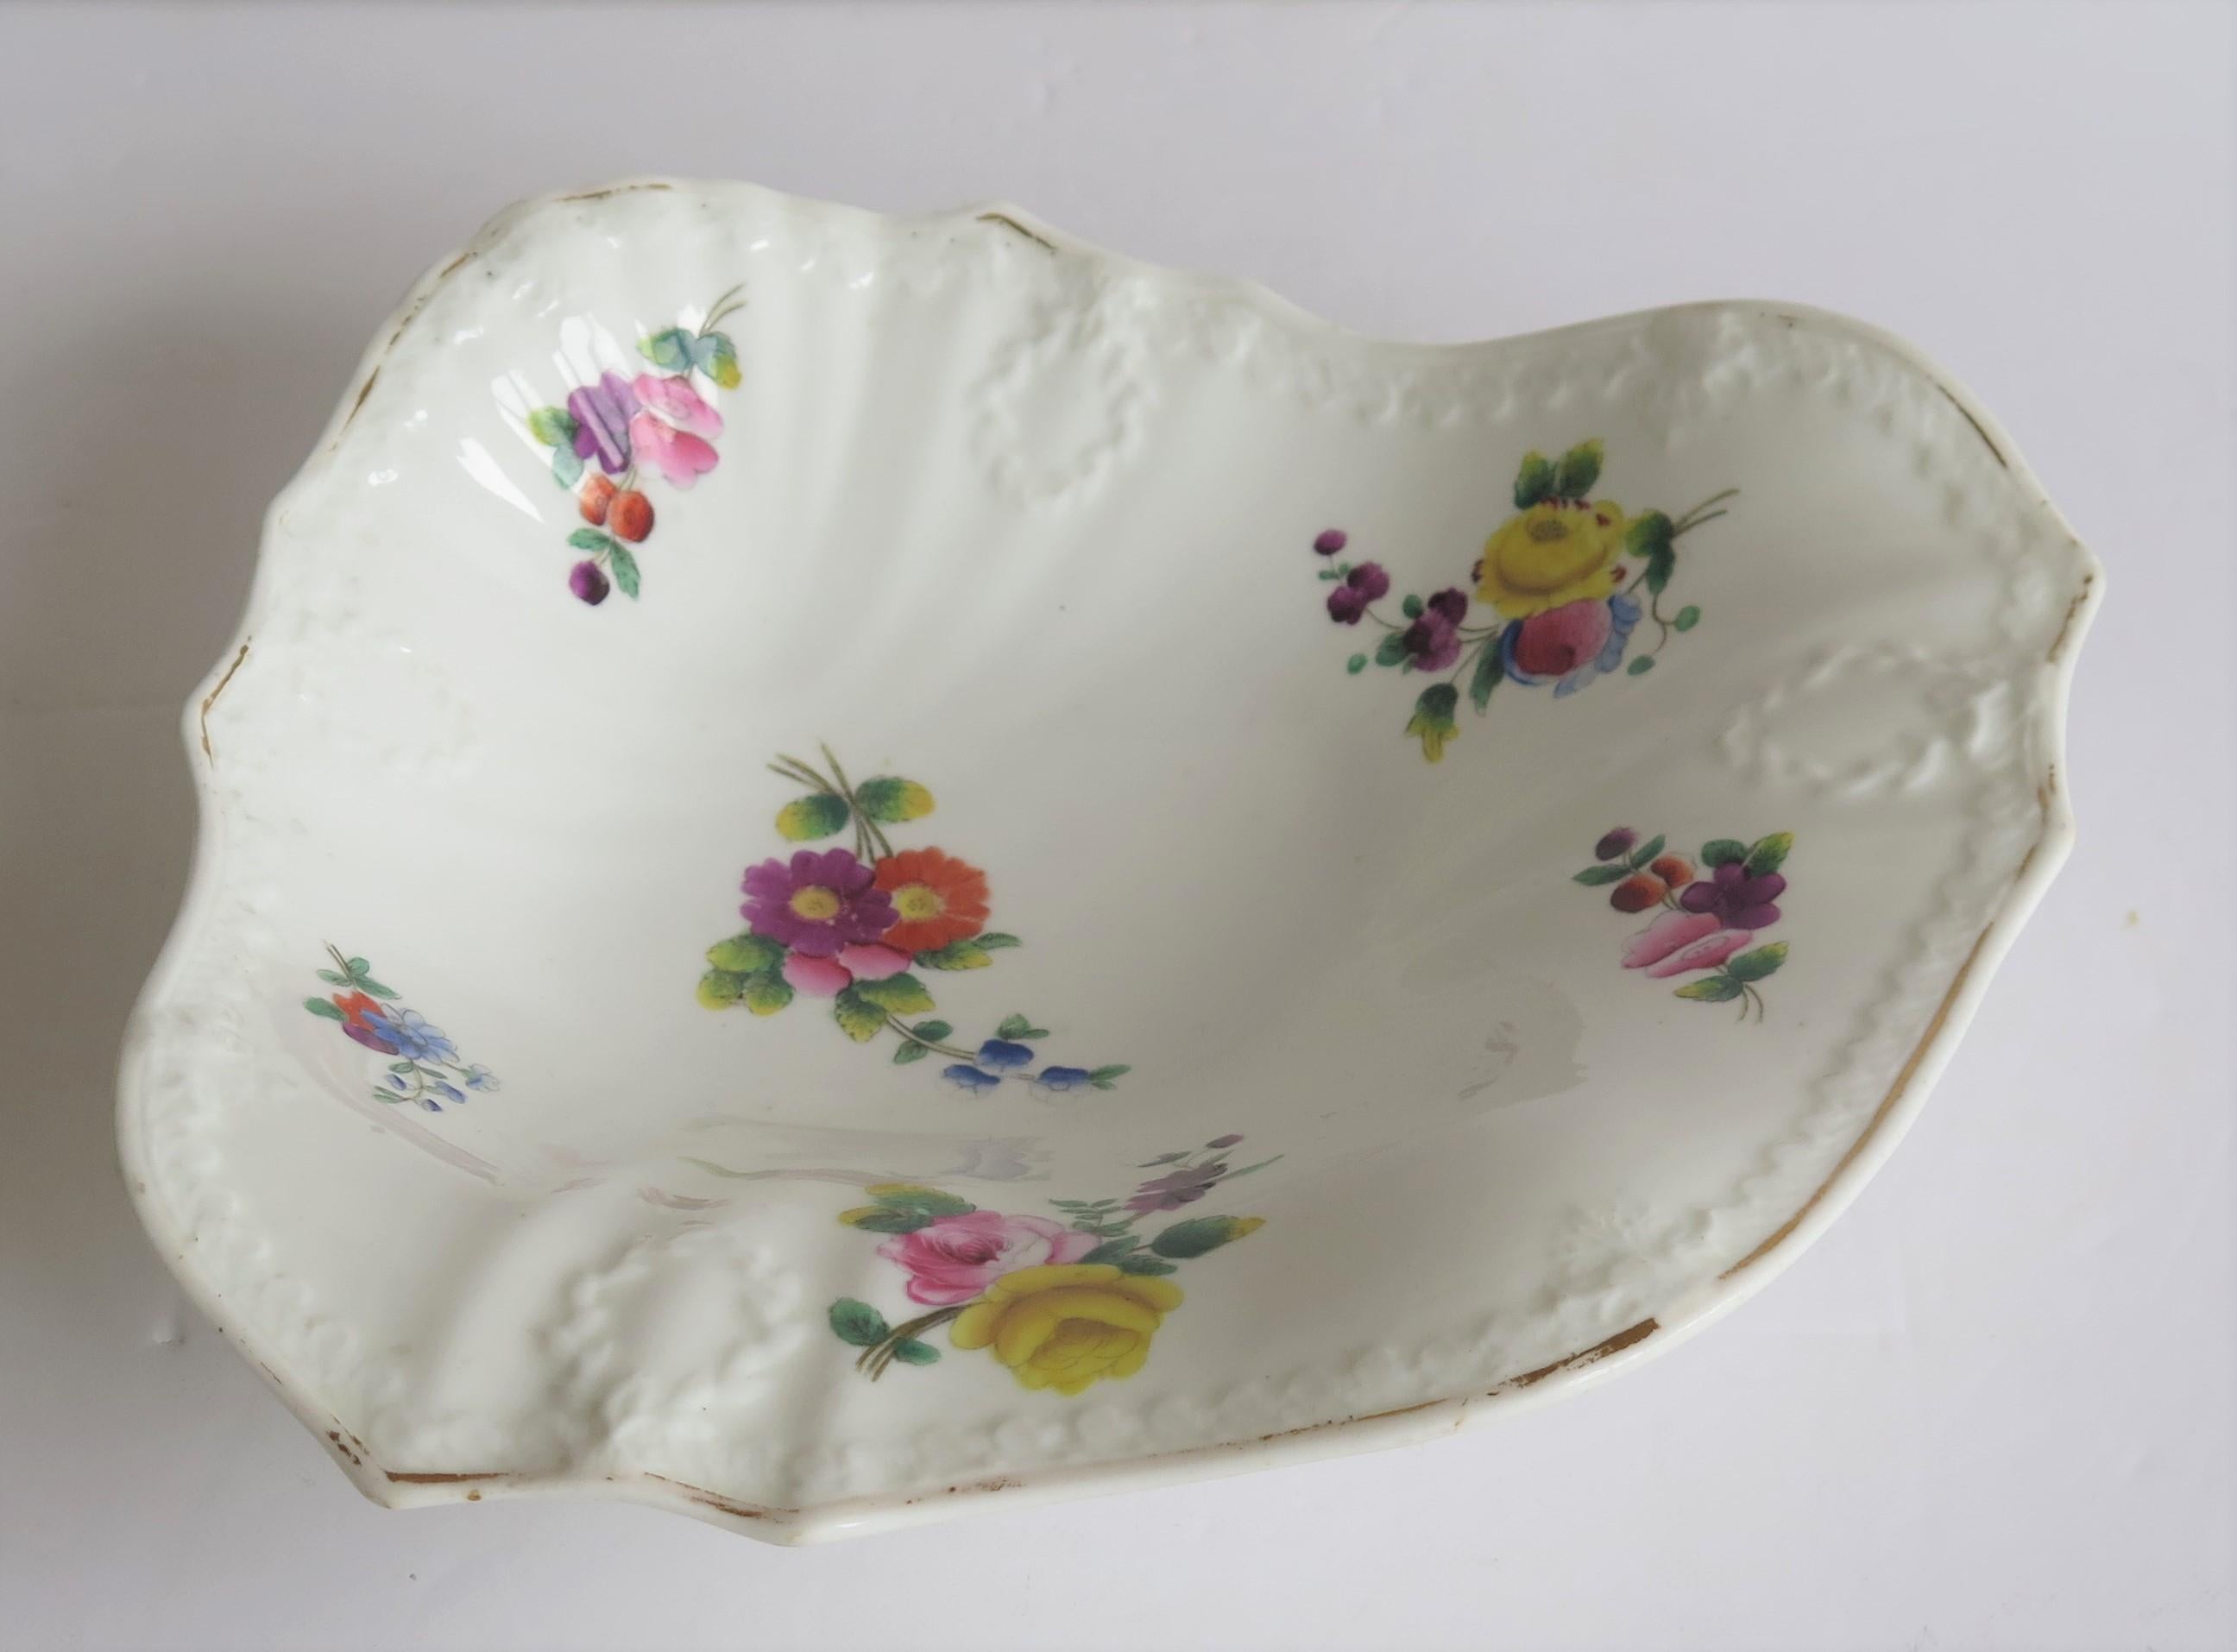 Fine H & R Daniel Porcelain Shell Dish in Recorded Pattern 3884, circa 1830 For Sale 2